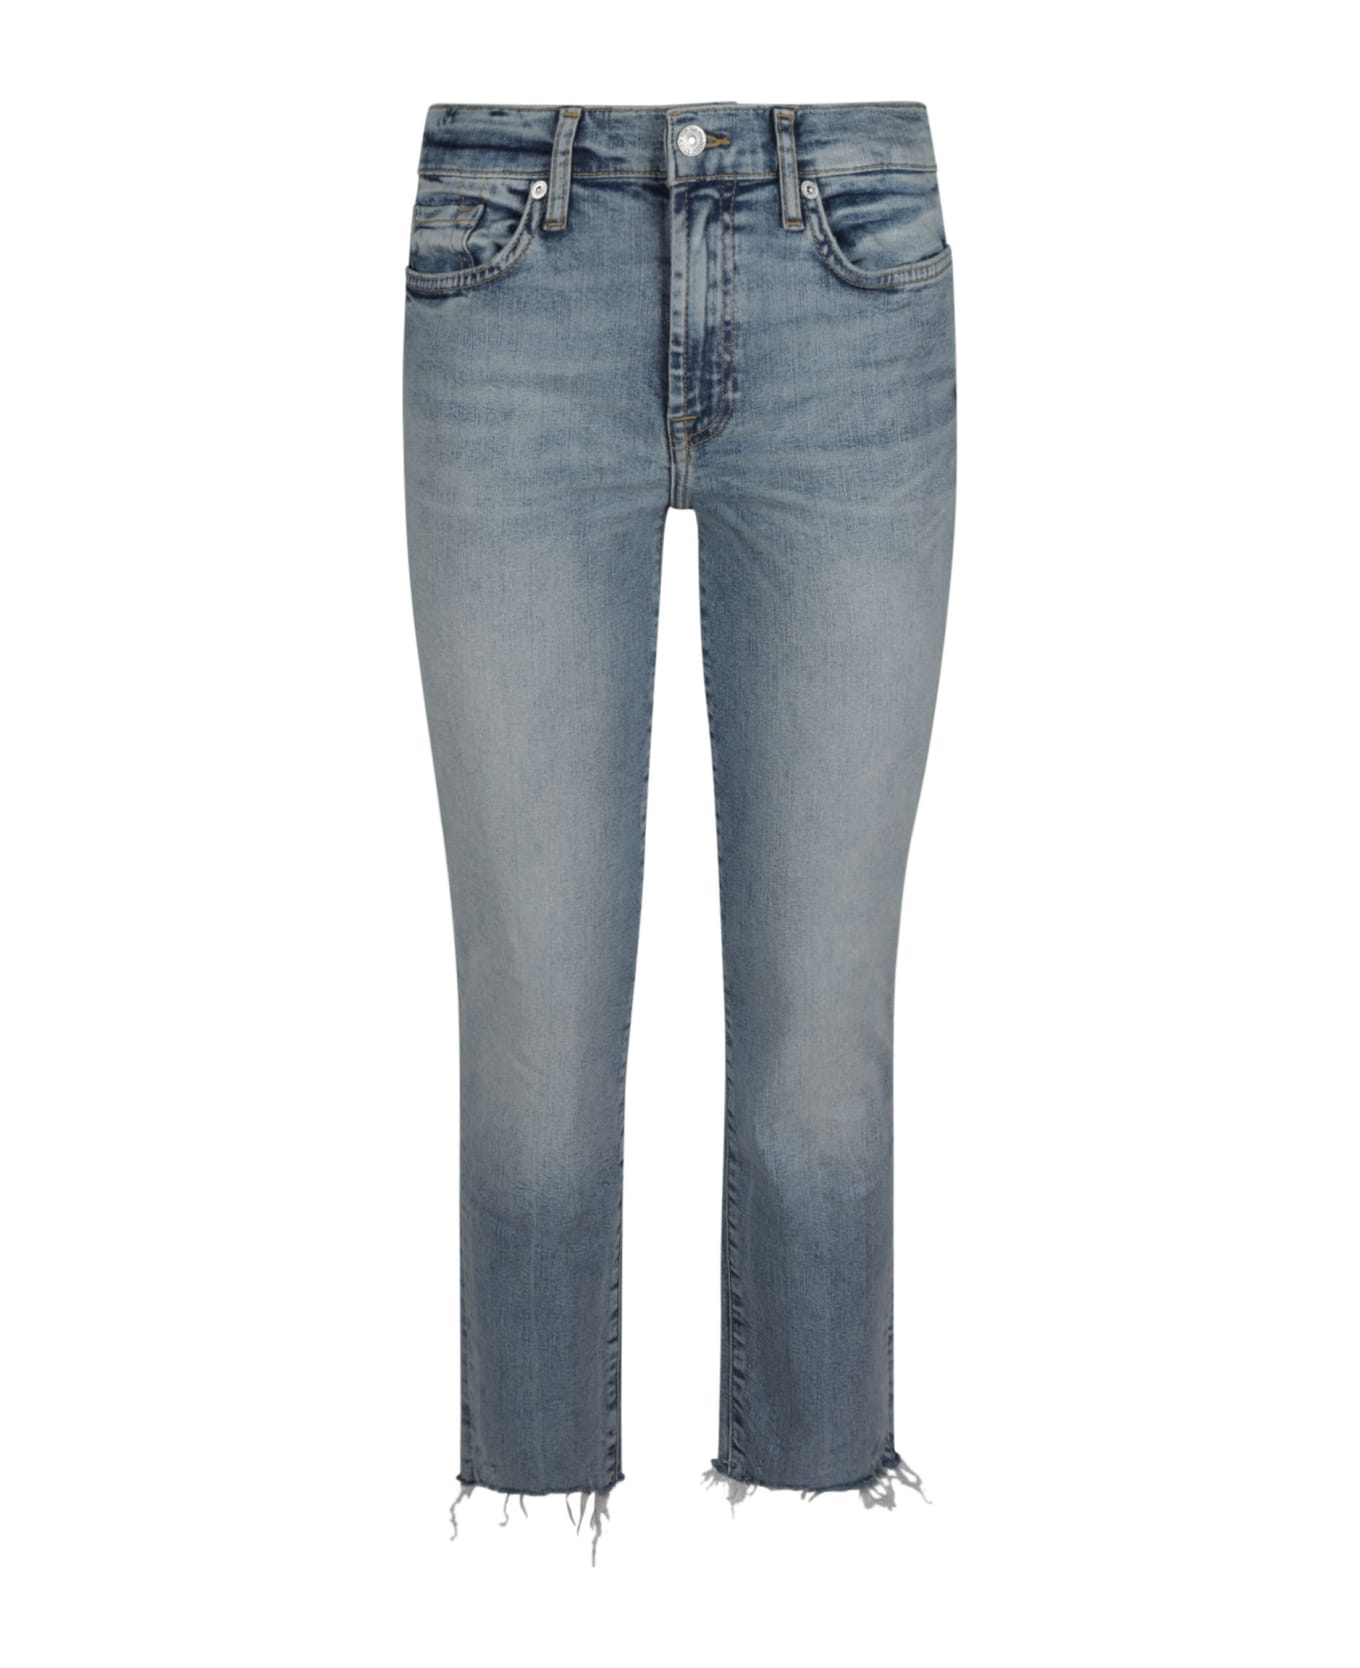 7 For All Mankind Roxanne Ankle Jeans - Blue Denim デニム